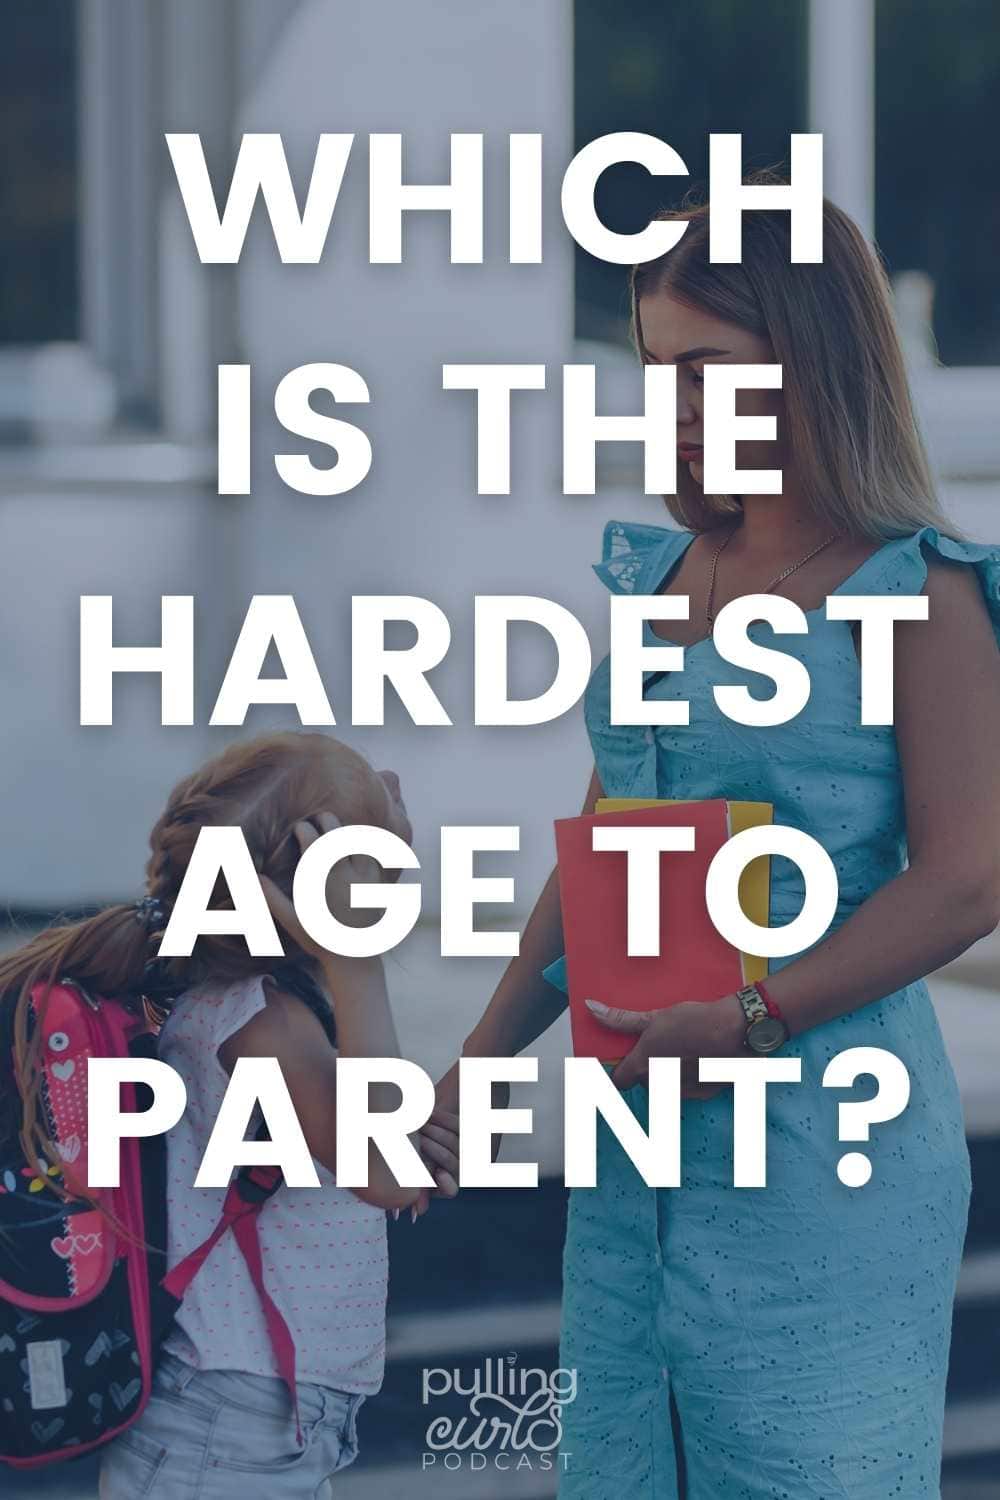 It seems like on social media people are constantly battling which age is the hardest to parent. Today I want to chat about what age is the hardest to parent. via @pullingcurls